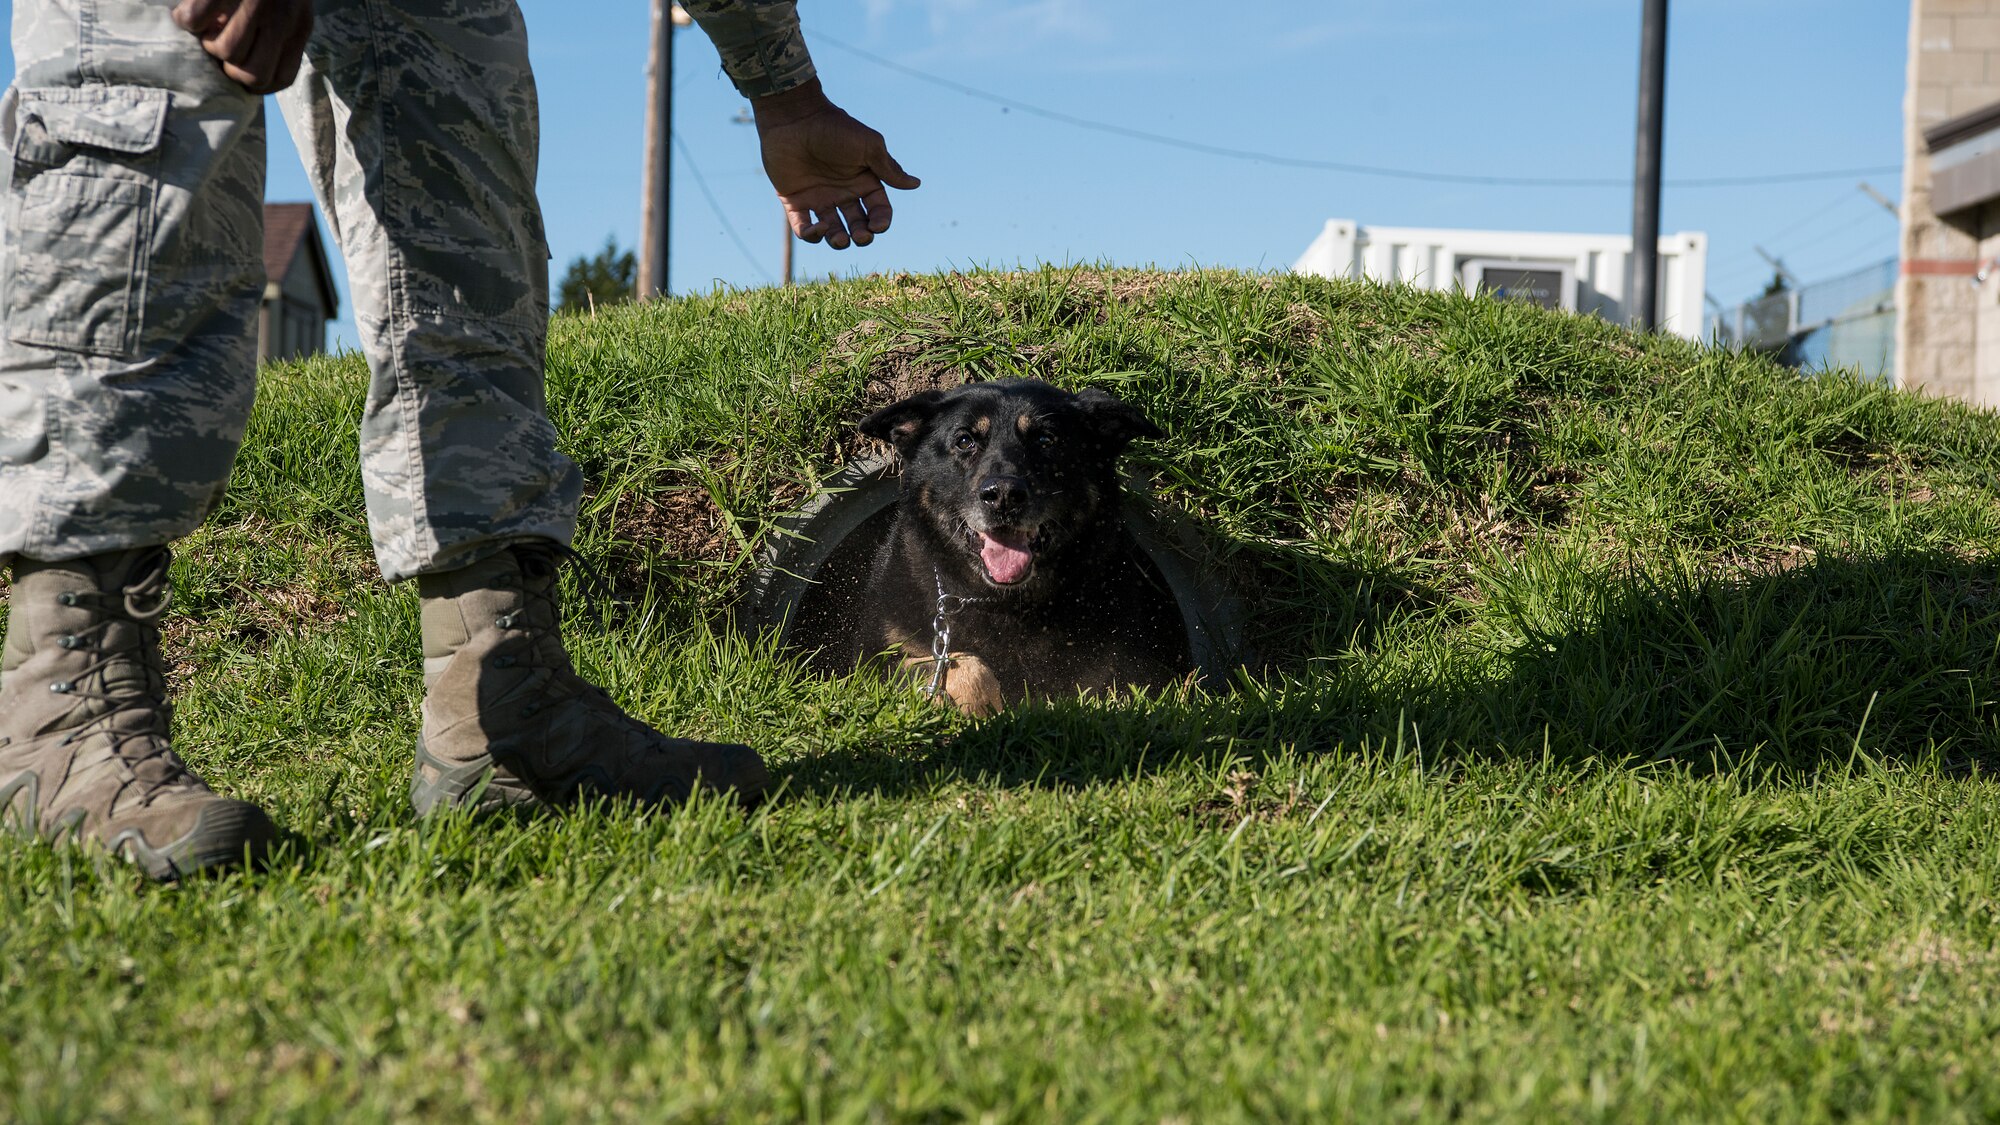 Senior Airman Tyclint Andrews, 30th Security Forces Squadron military dog handler, takes his military working dog through a tunnel on the training course Dec. 18, 2018, on Vandenberg Air Force Base, Calif. (U.S. Air Force photo by Airman 1st Class Hanah Abercrombie)